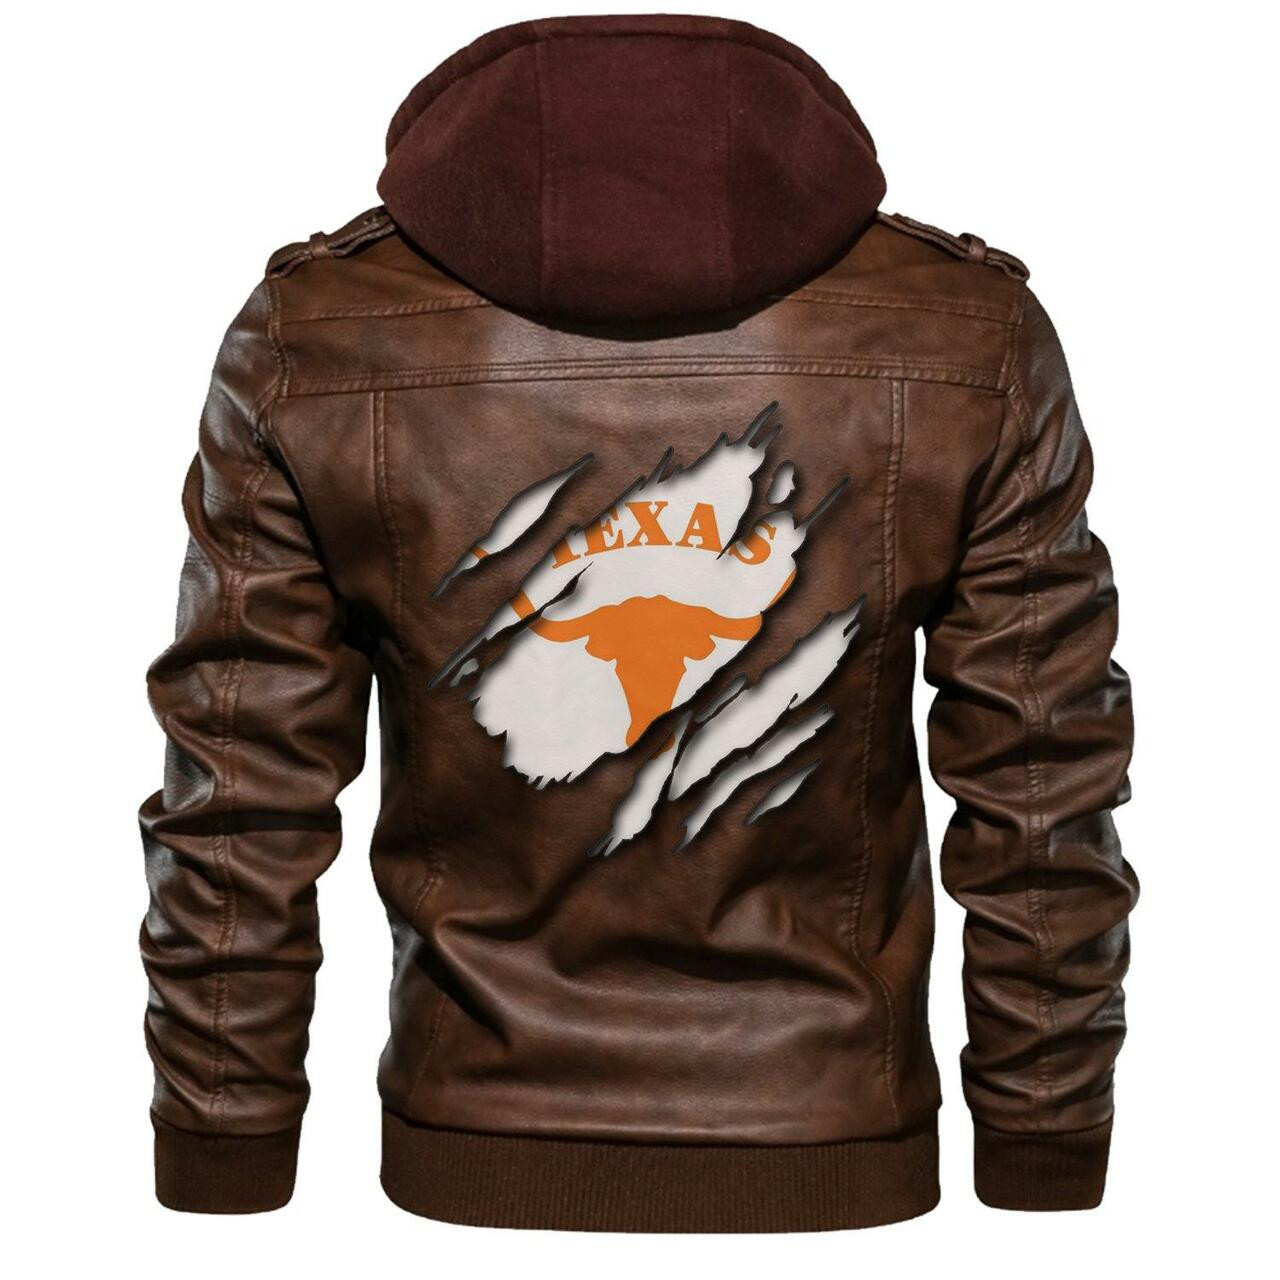 Nice leather jacket For you 228